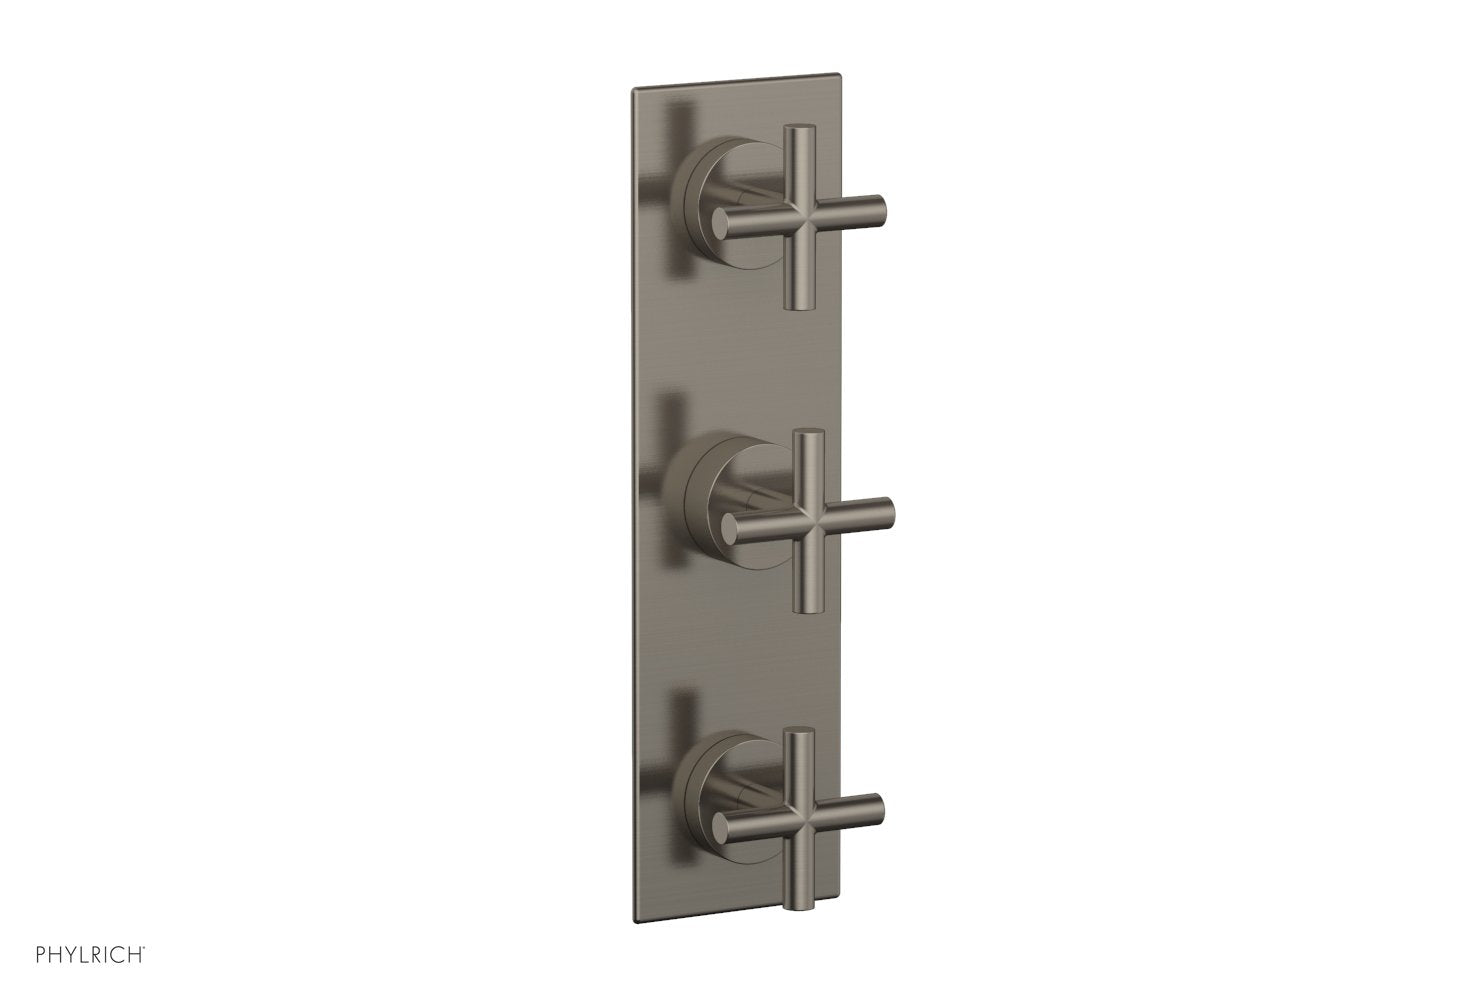 Phylrich TRANSITION 1/2" Thermostatic Valve with Two Volume Control, Cross Handles